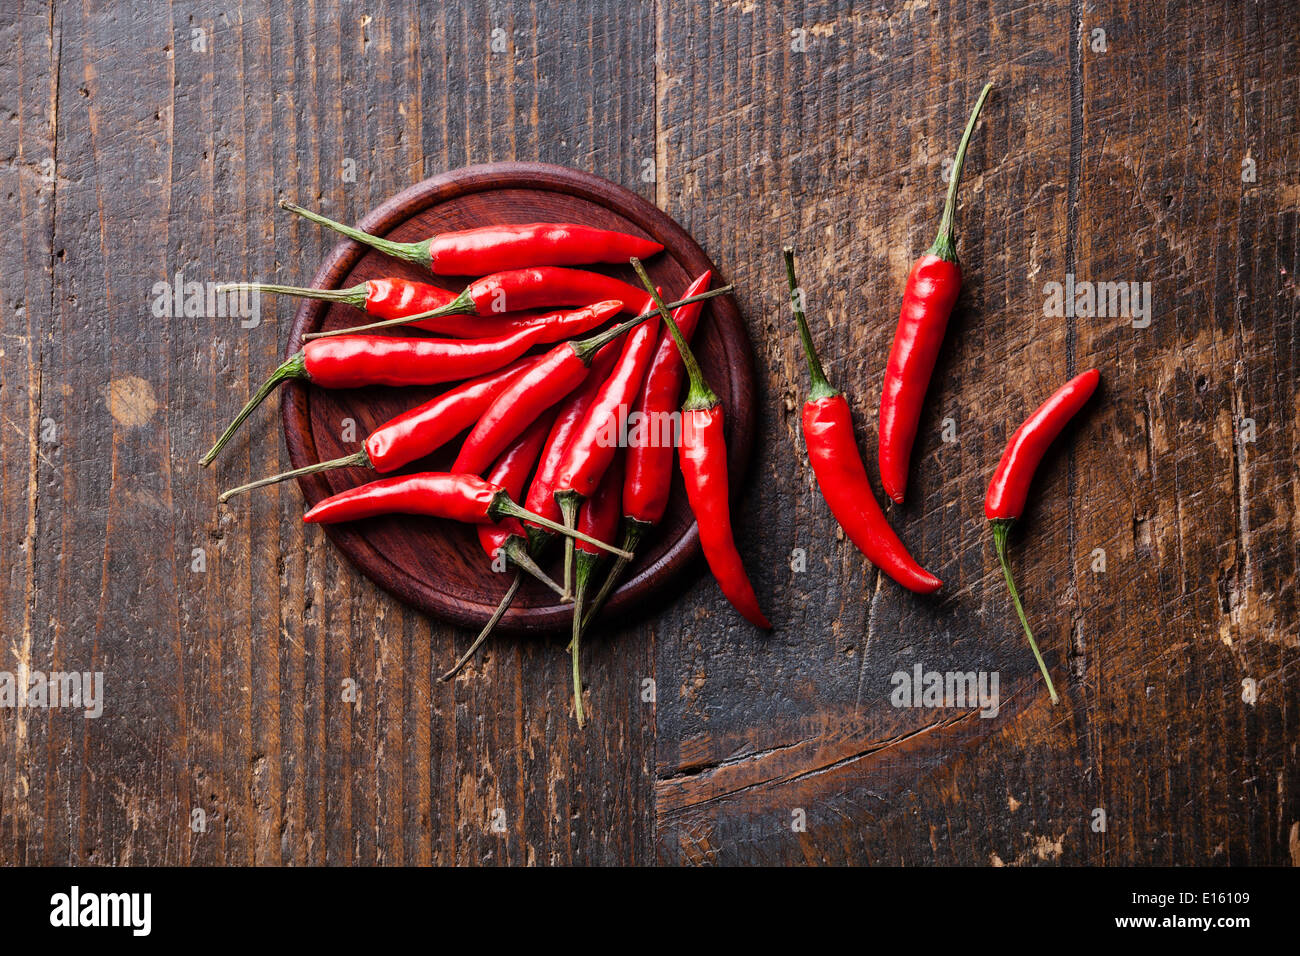 Red Hot Chili Peppers on wooden background Stock Photo